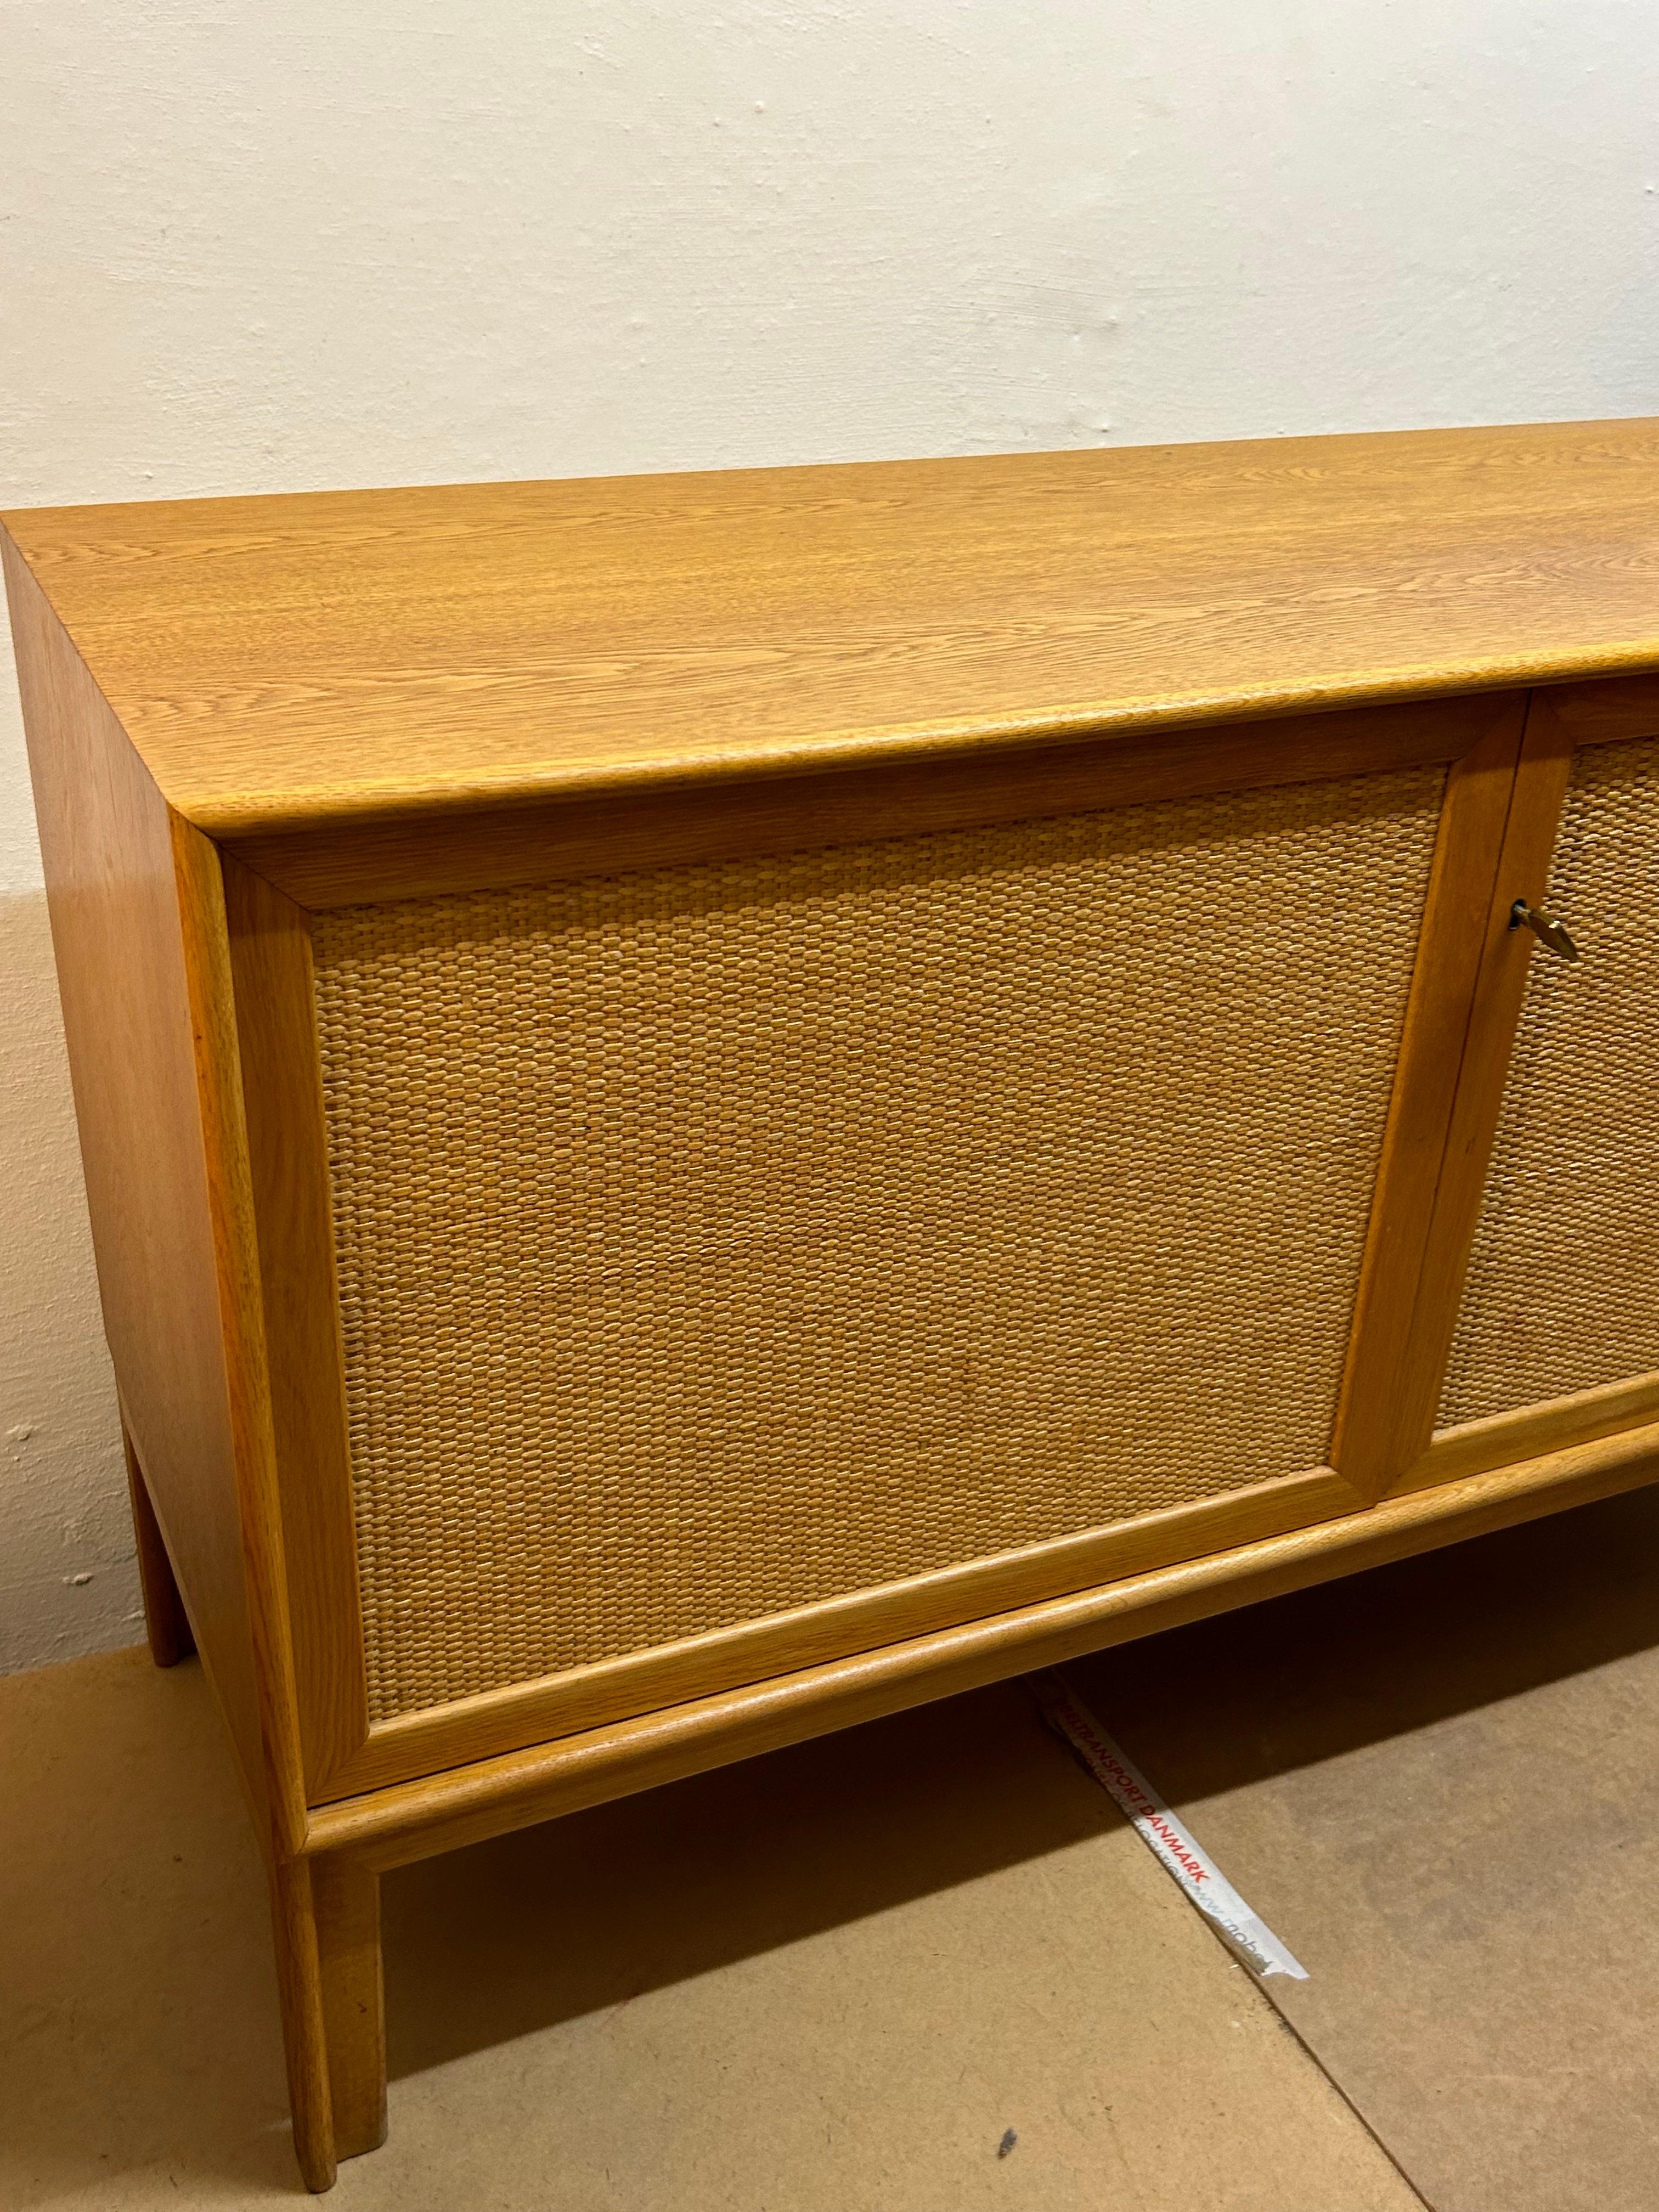 Hand-Crafted Vintage Alf Svensson Sideboard in Oak and Cane with Two Doors, Sweden, 1950s For Sale